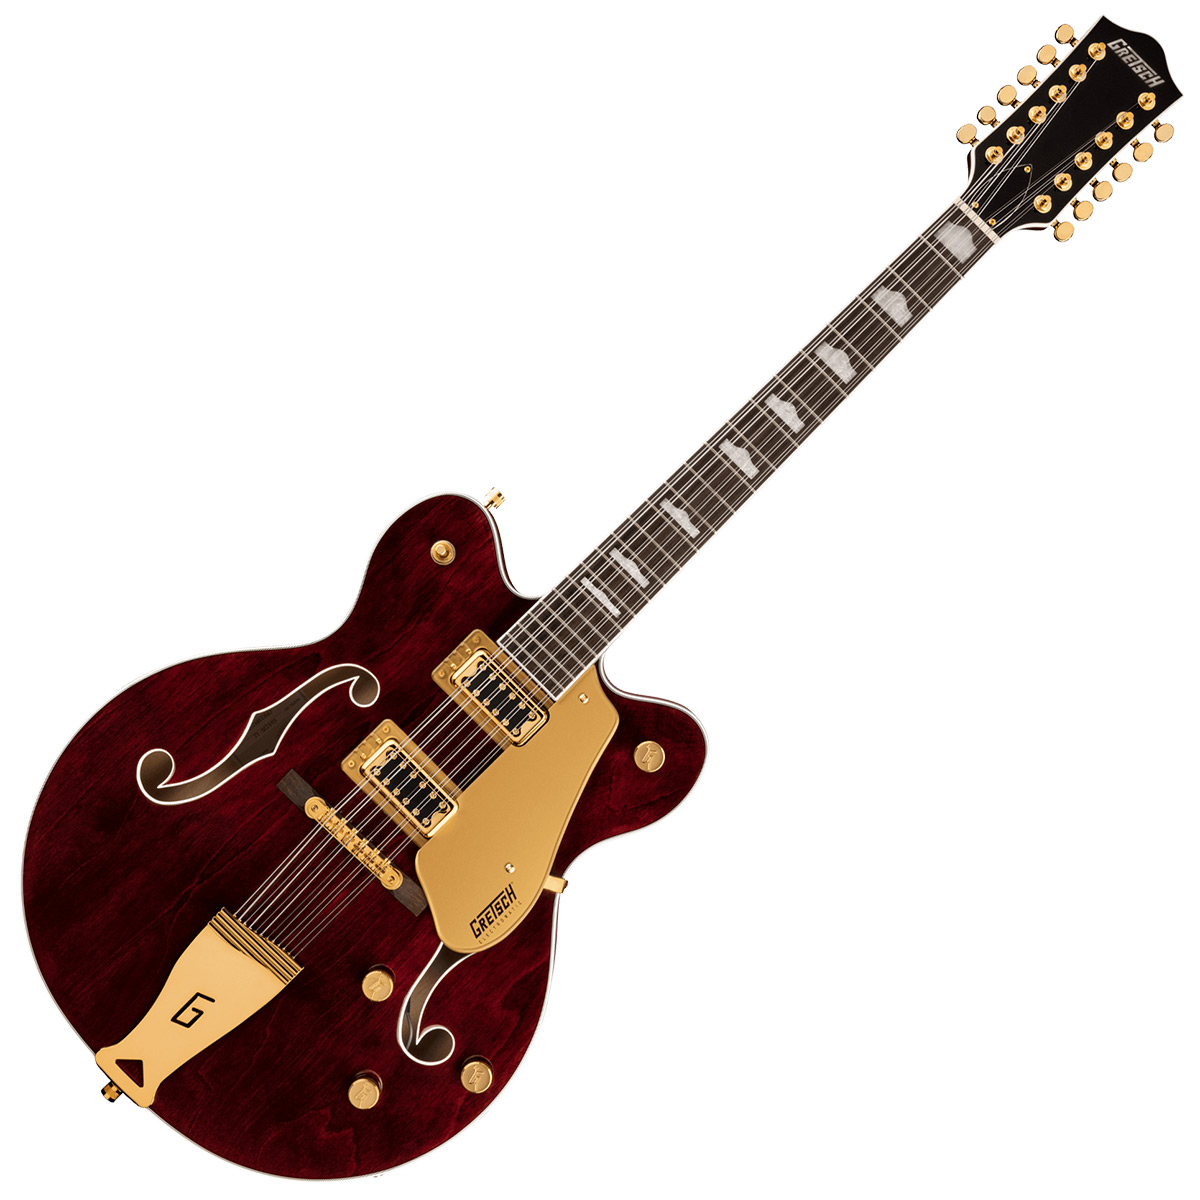 GRETSCH G5422G-12 Electromatic Classic Hollow BODY Double-Cut 12-String (Walnut Stain)